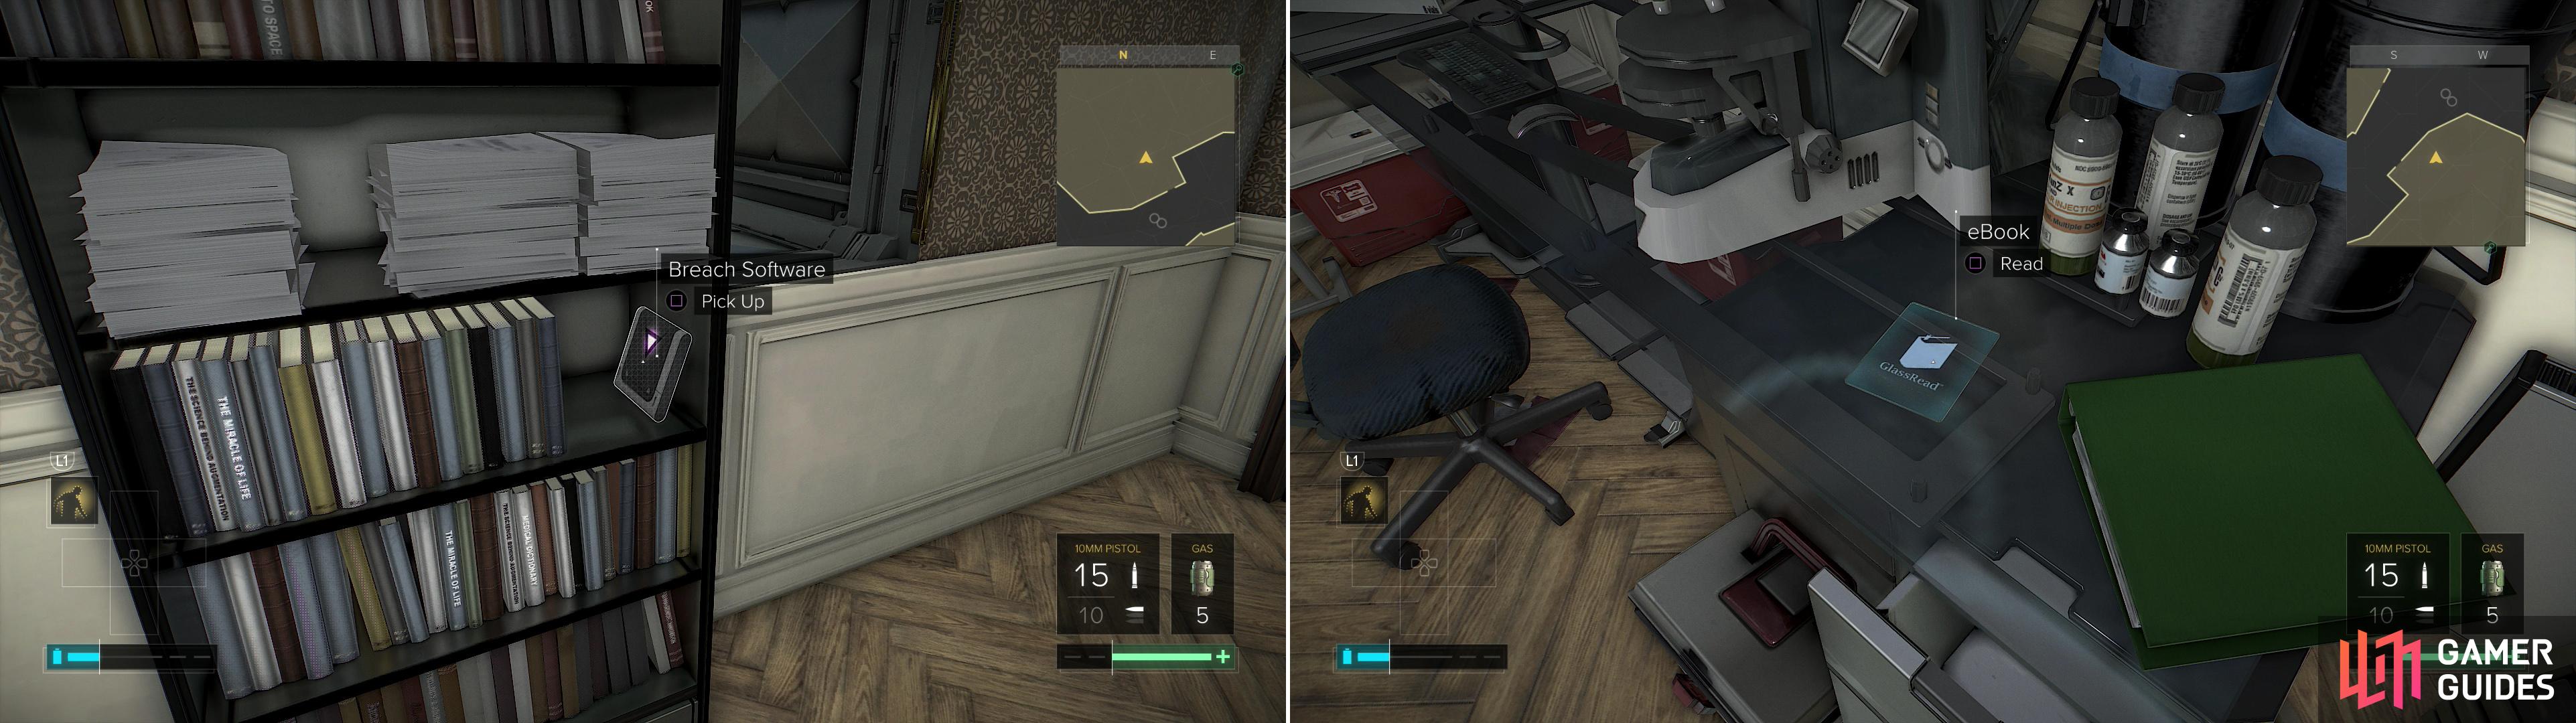 In Eugen Weisses Apartment - the apartment above the Coffee Shop - you'll find Breach Software #27 (left) and an eBook (right).